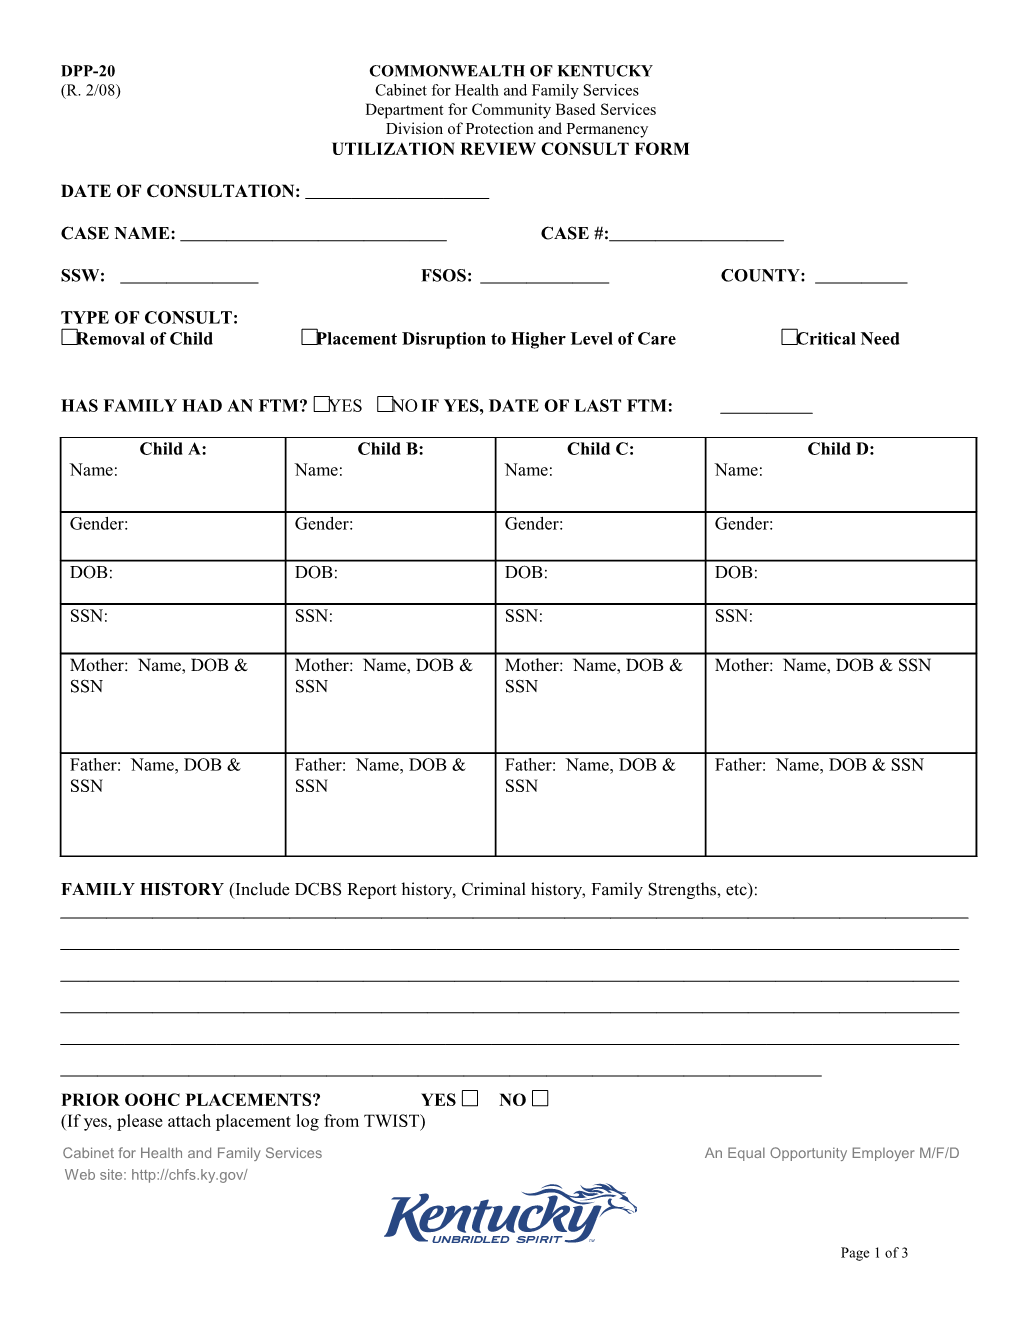 Utilization Review Consult Form